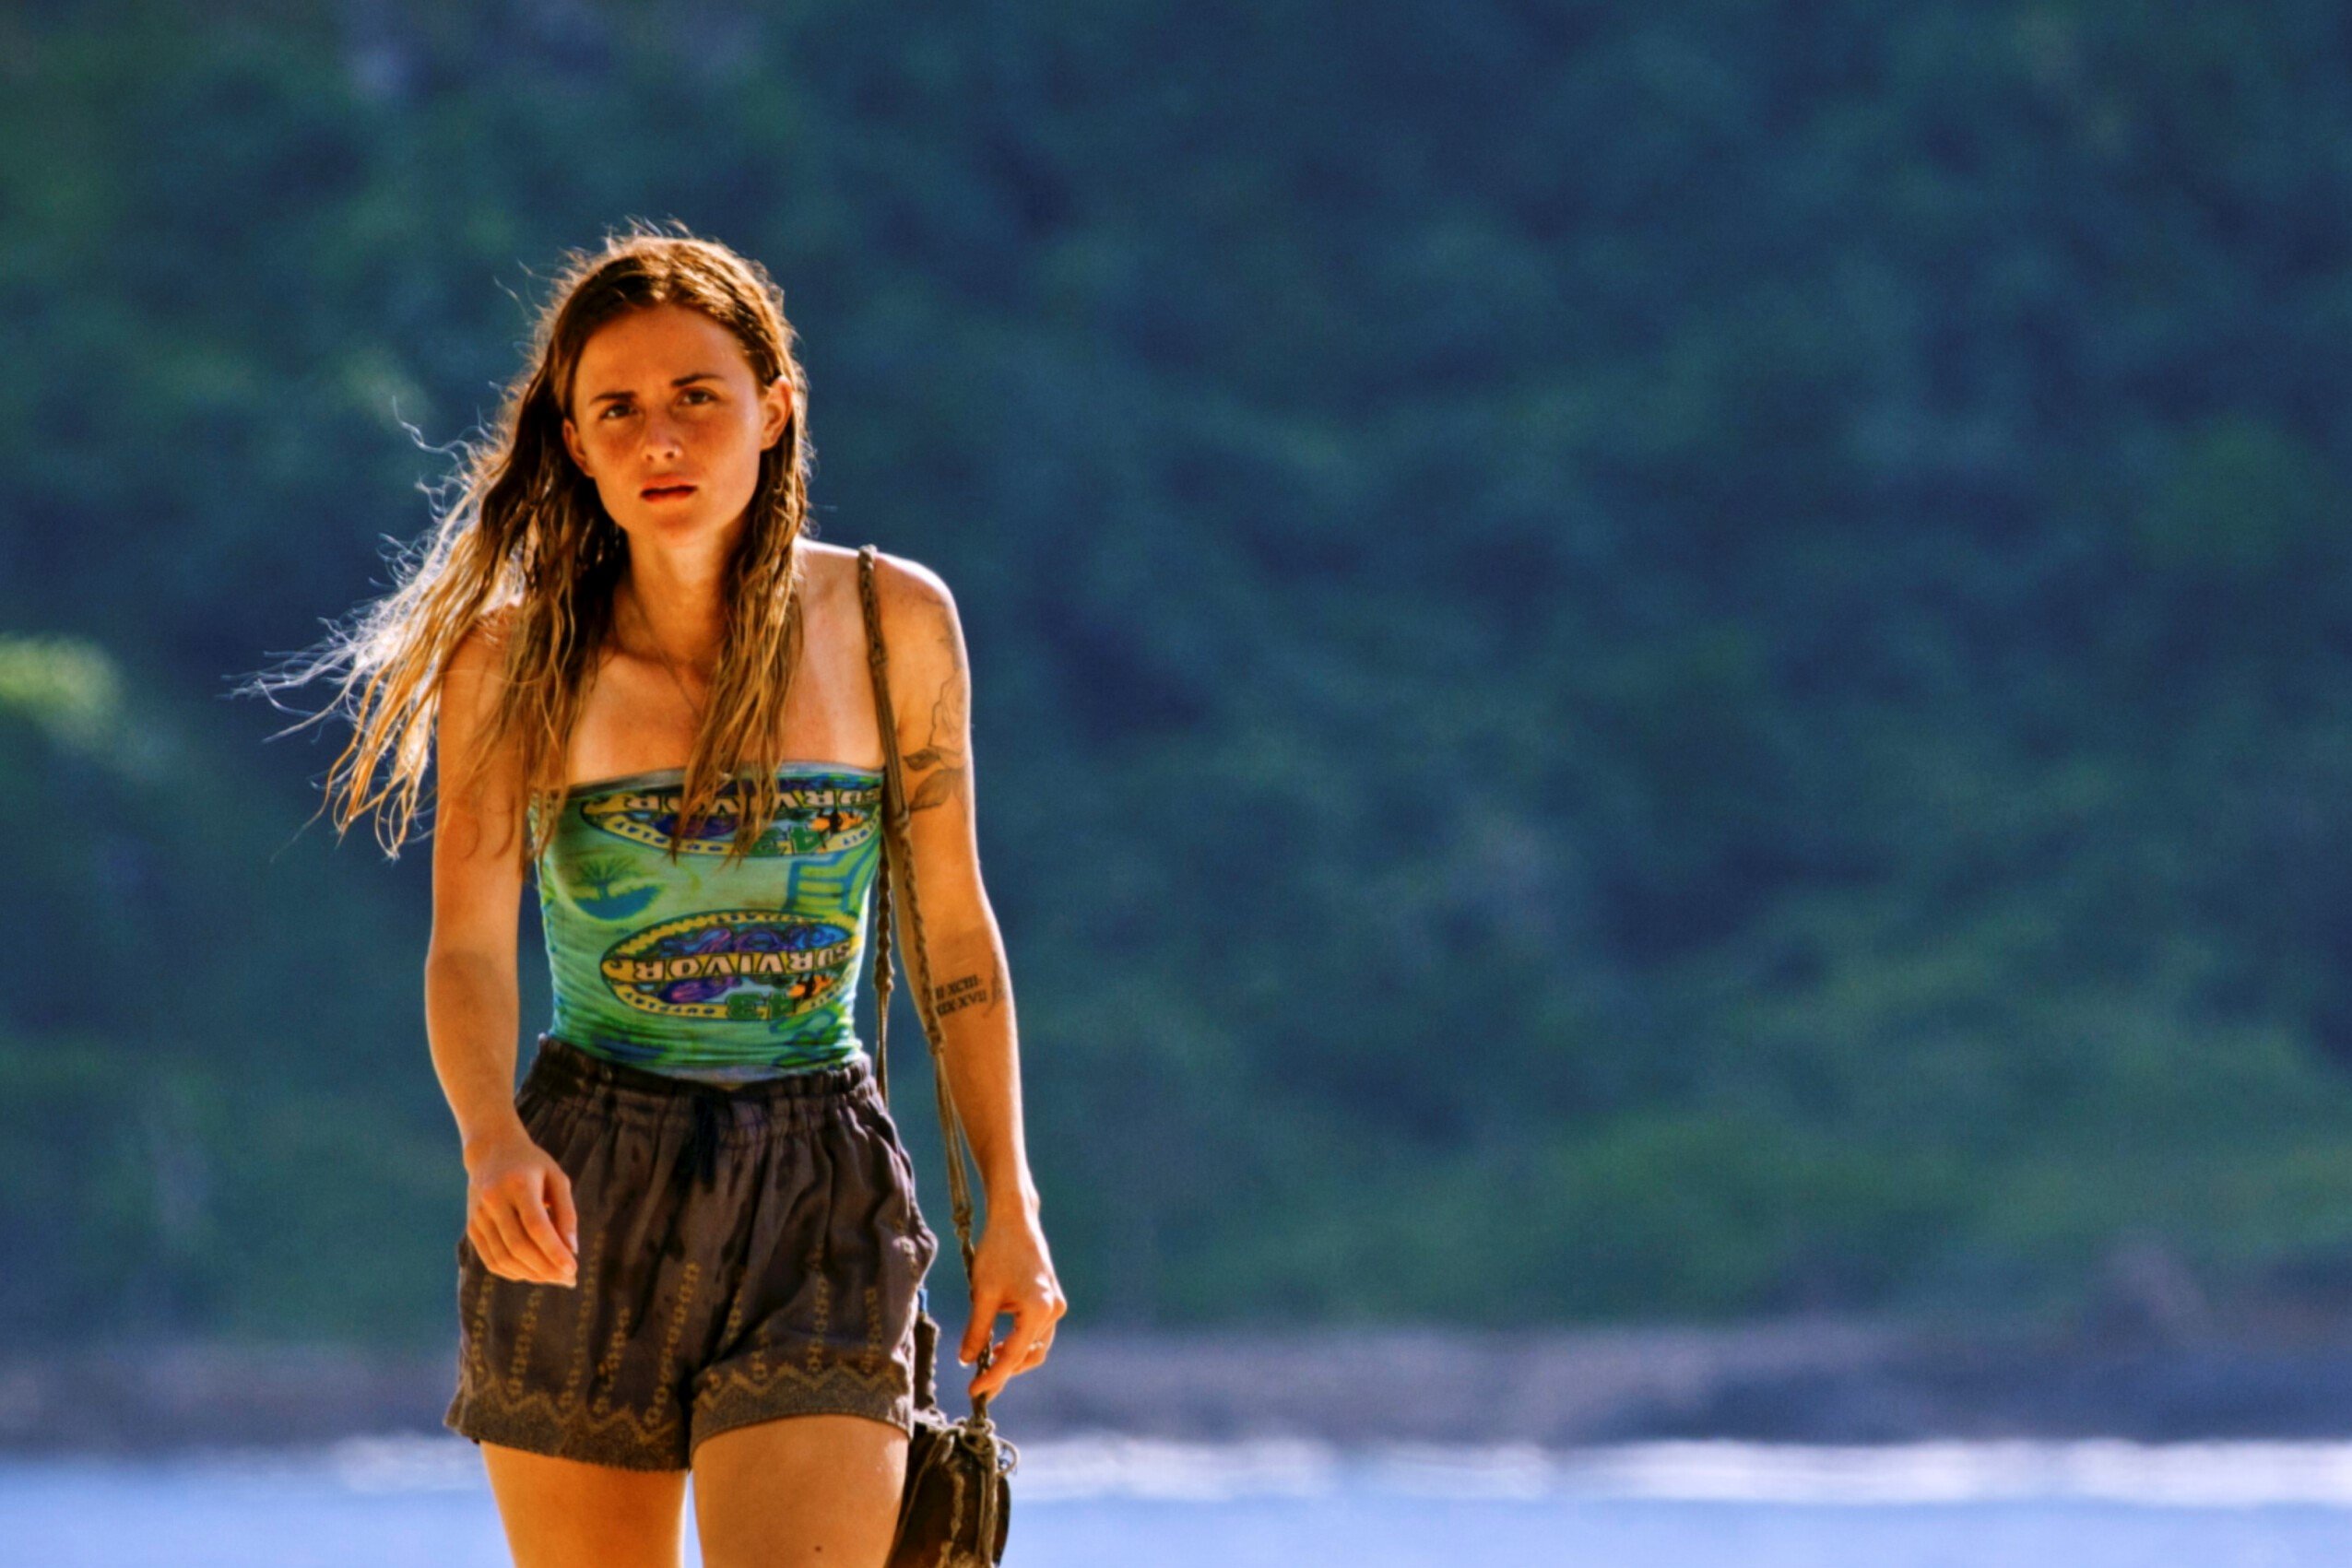 Cassidy Clark, who according to some spoilers, might win 'Survivor' Season 43, wears